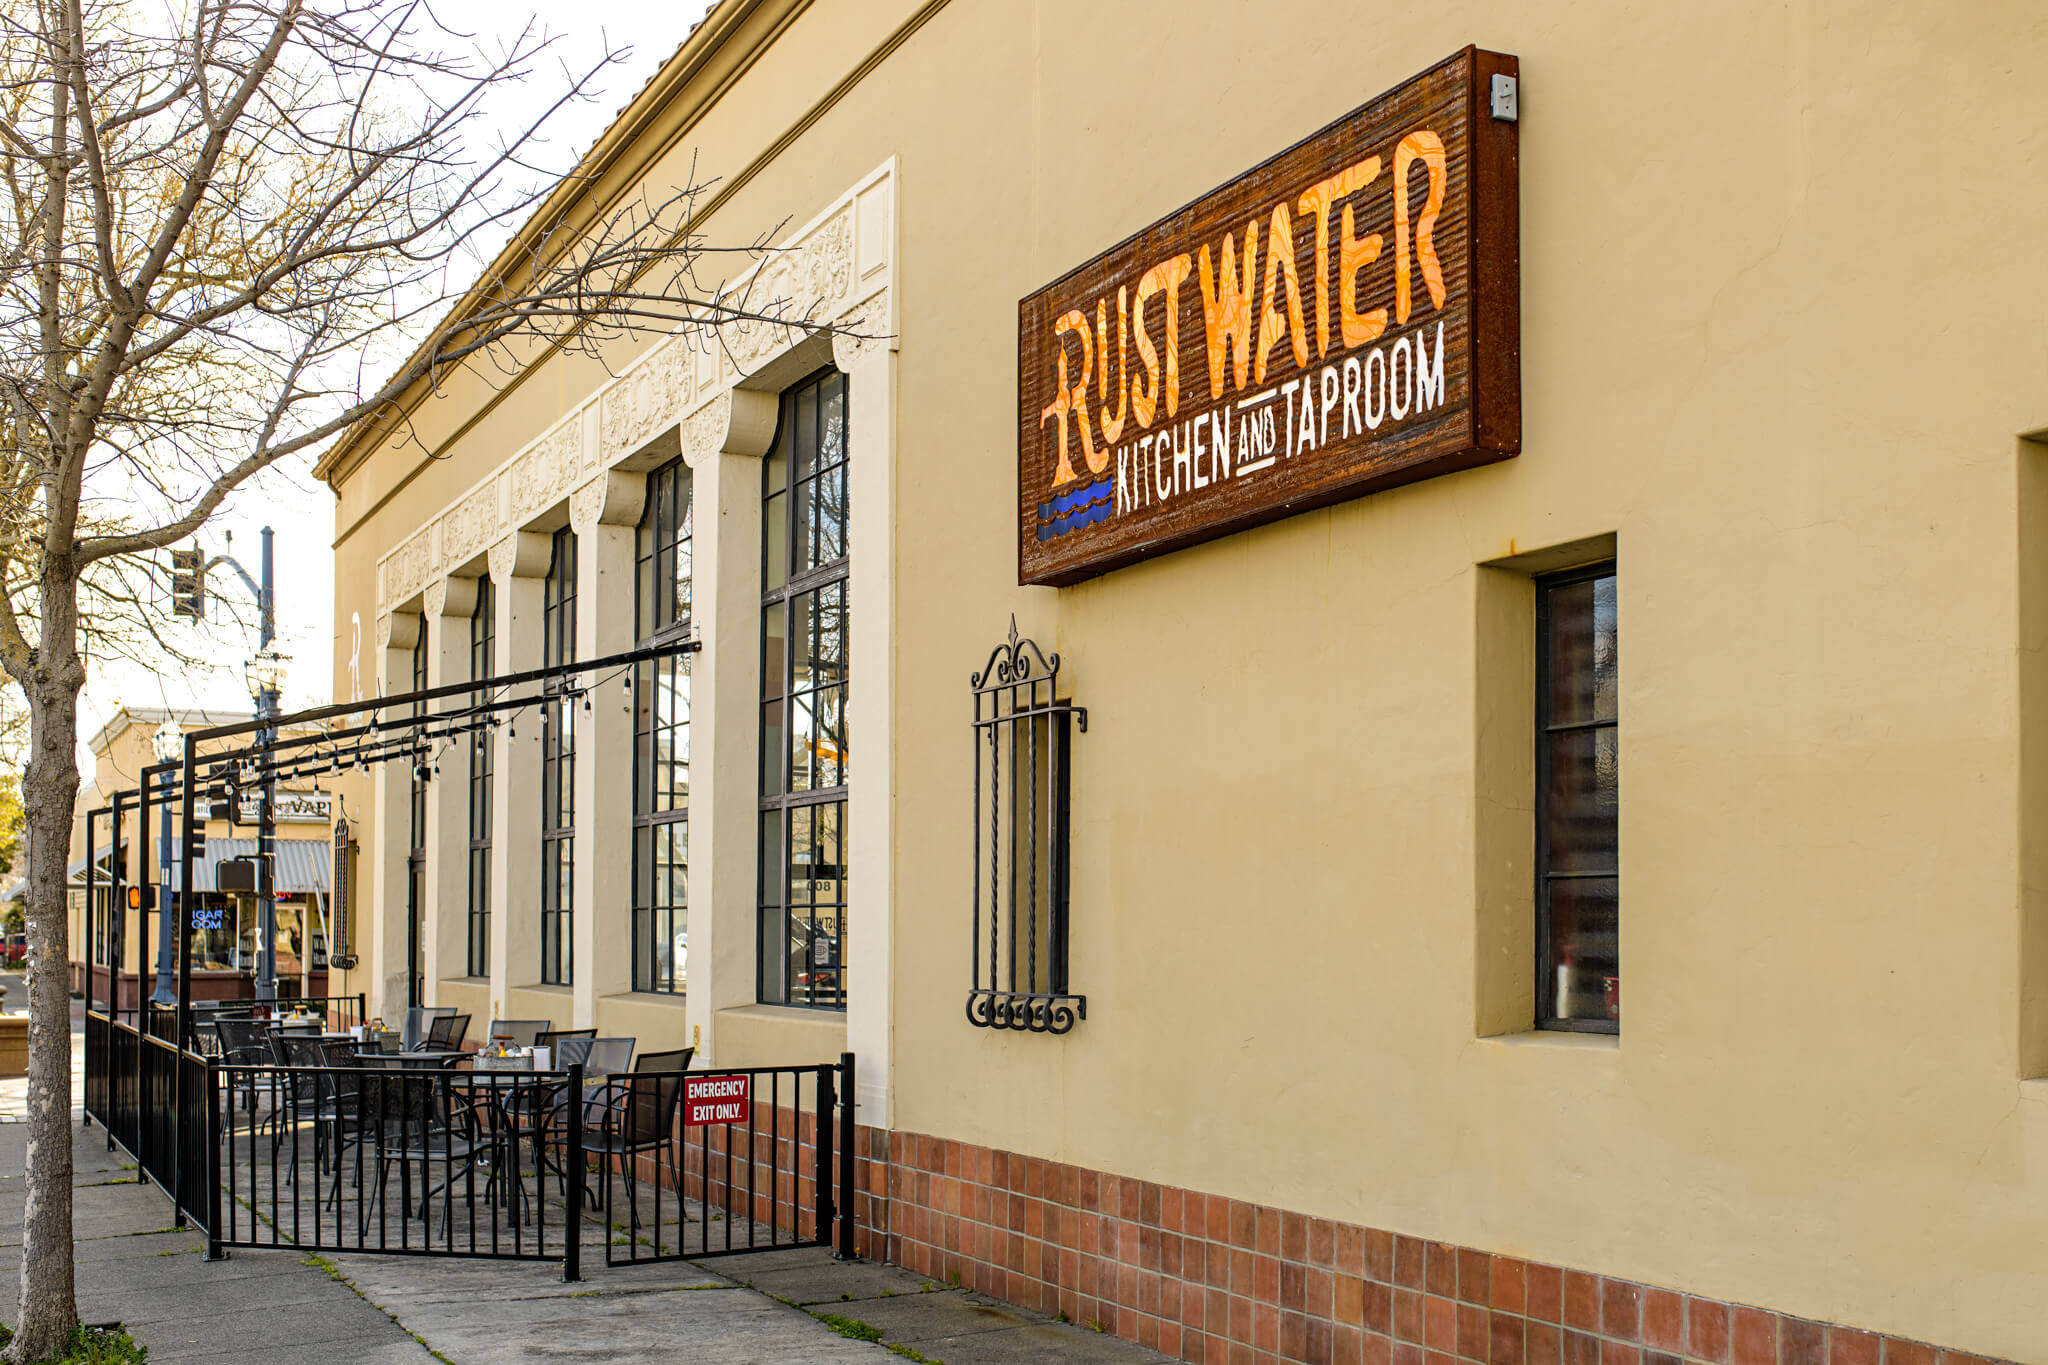 Image of Rustwater Kitchen and Taproom